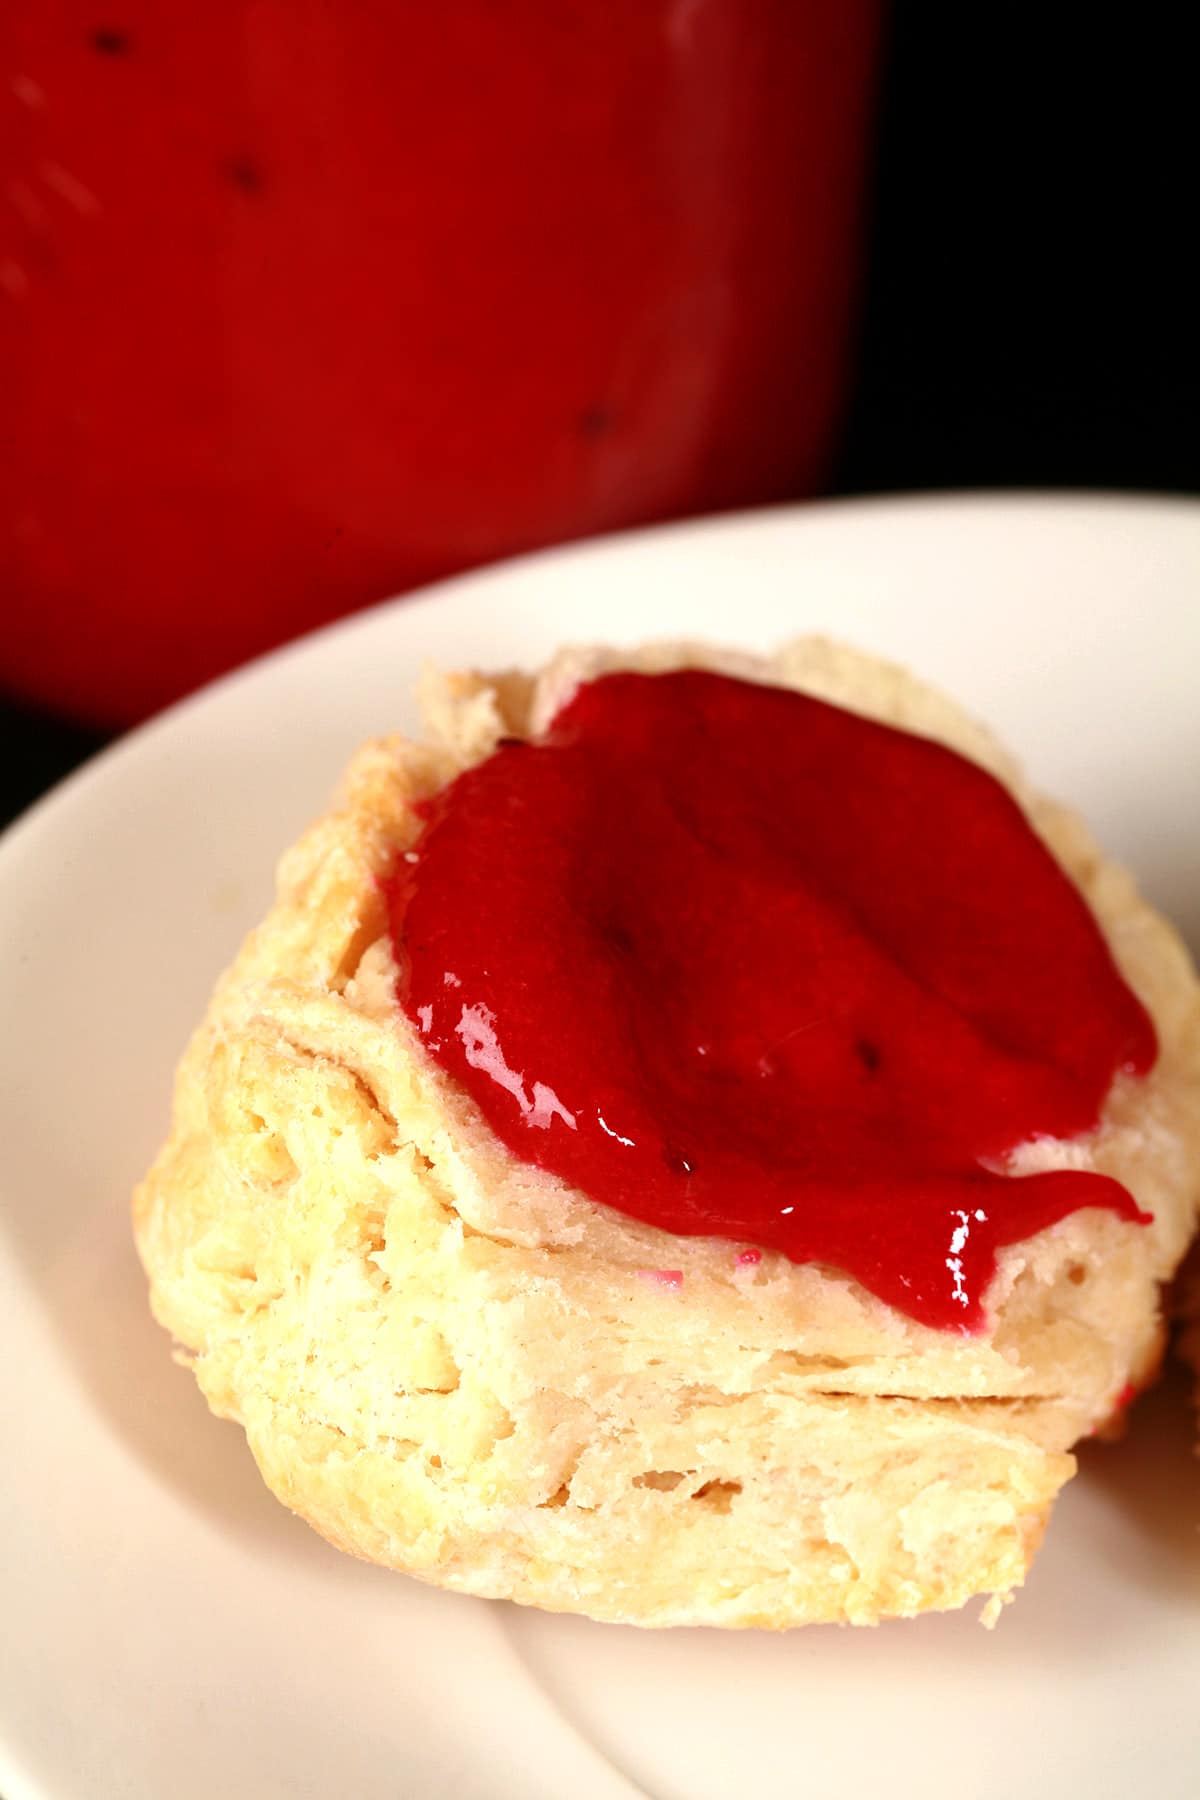 A close up photo of a biscuit topped with blackcurrant curd.